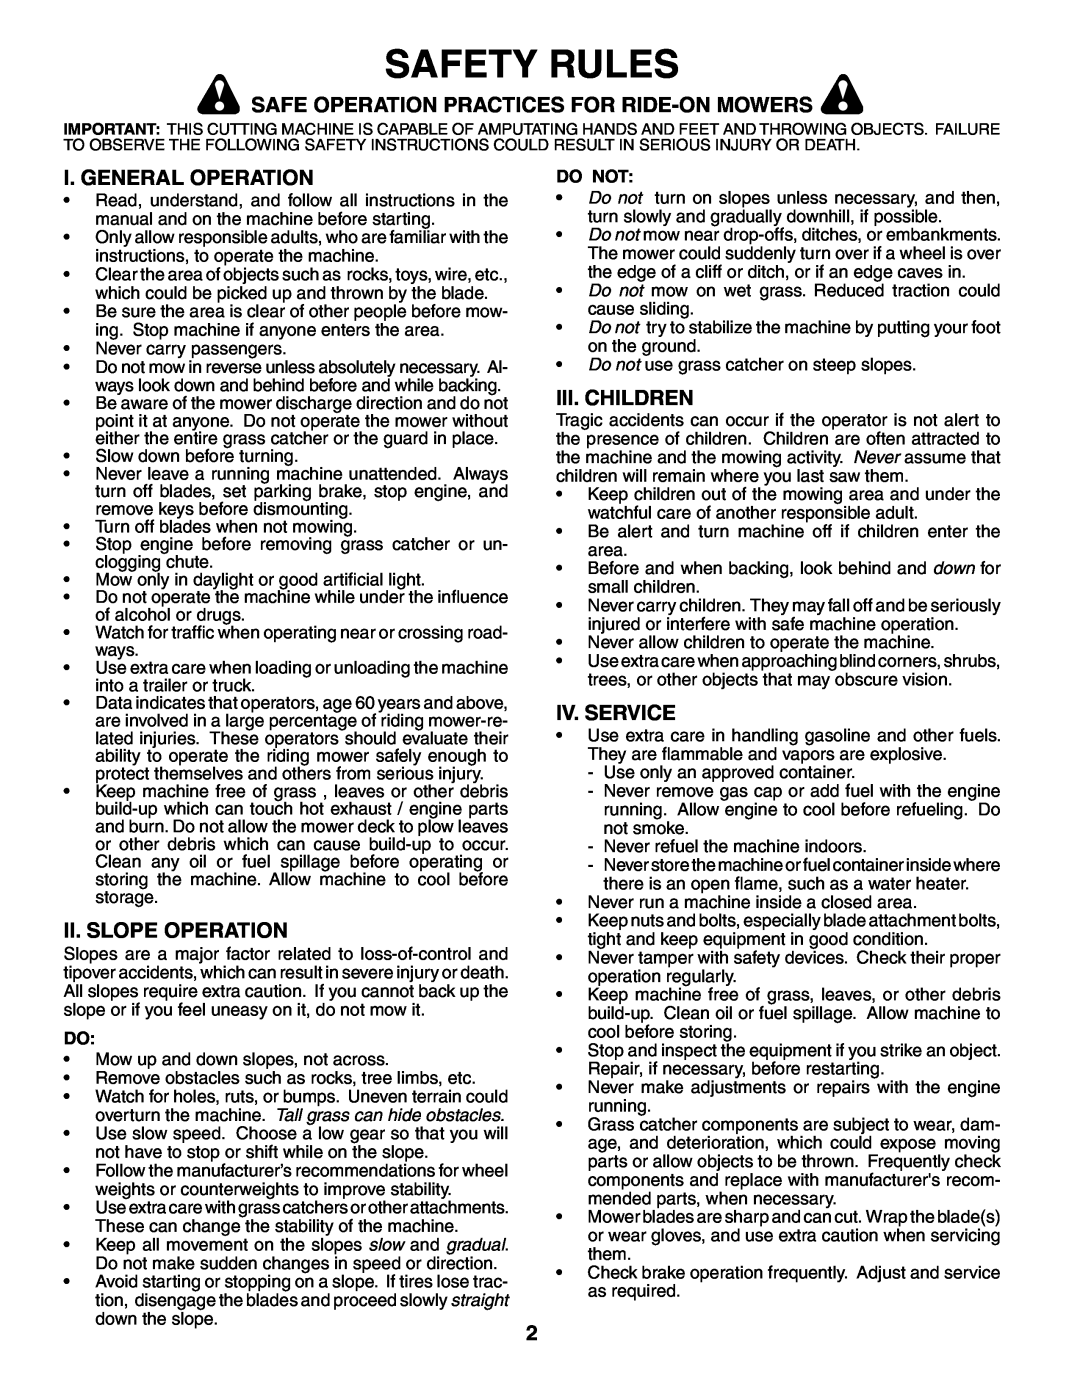 Poulan PO175H42STA Safety Rules, Safe Operation Practices For Ride-On Mowers, I. General Operation, Ii. Slope Operation 